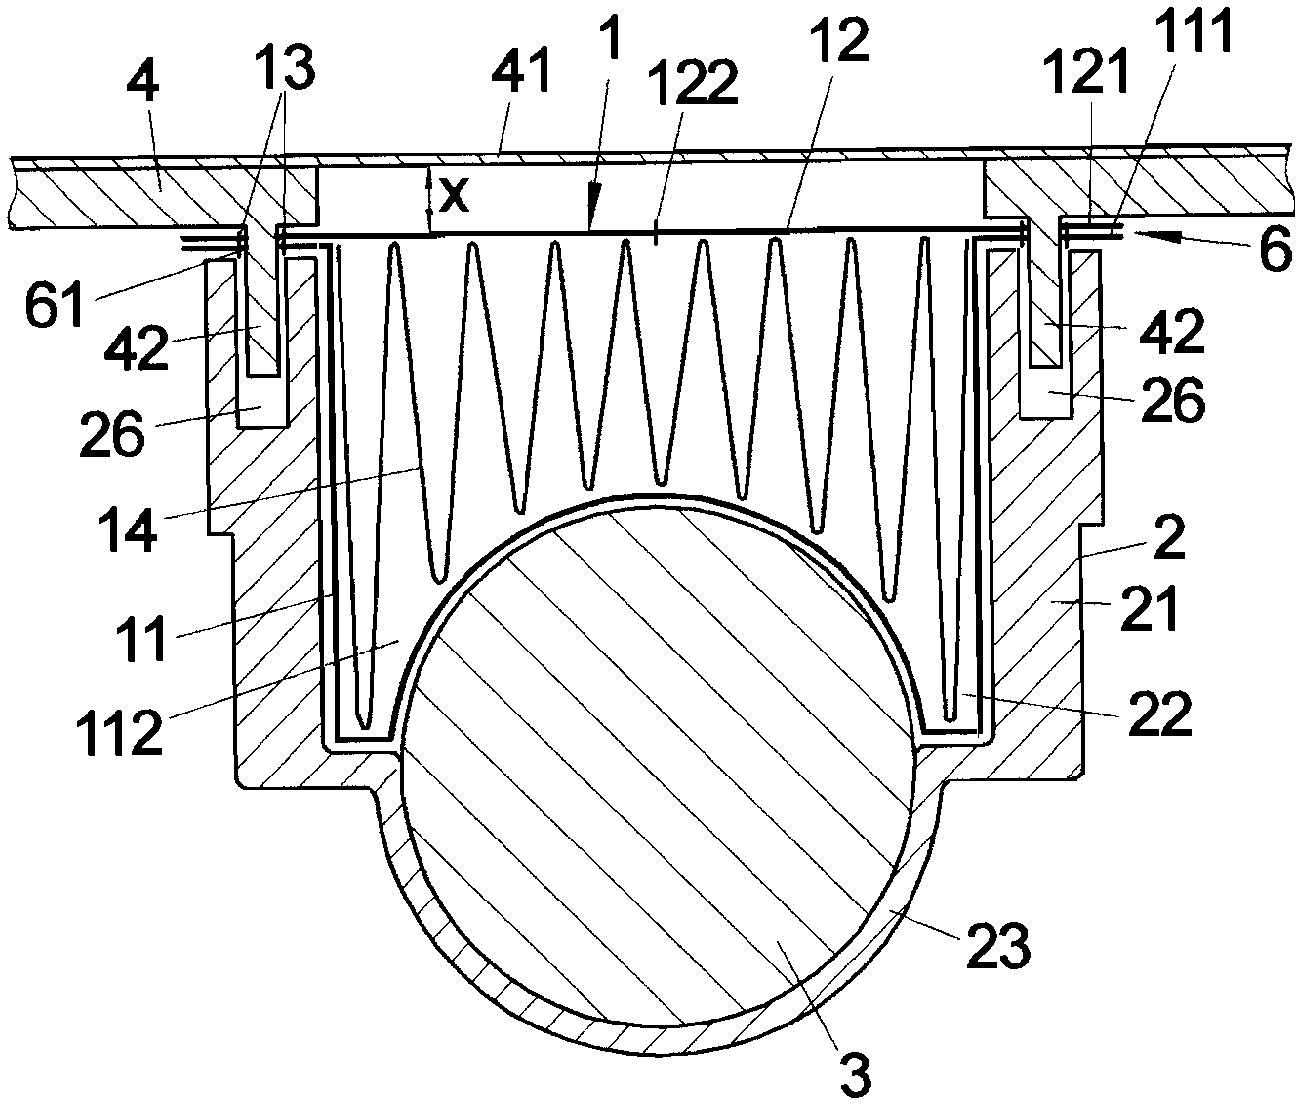 Airbag module for a vehicle occupant restraint system